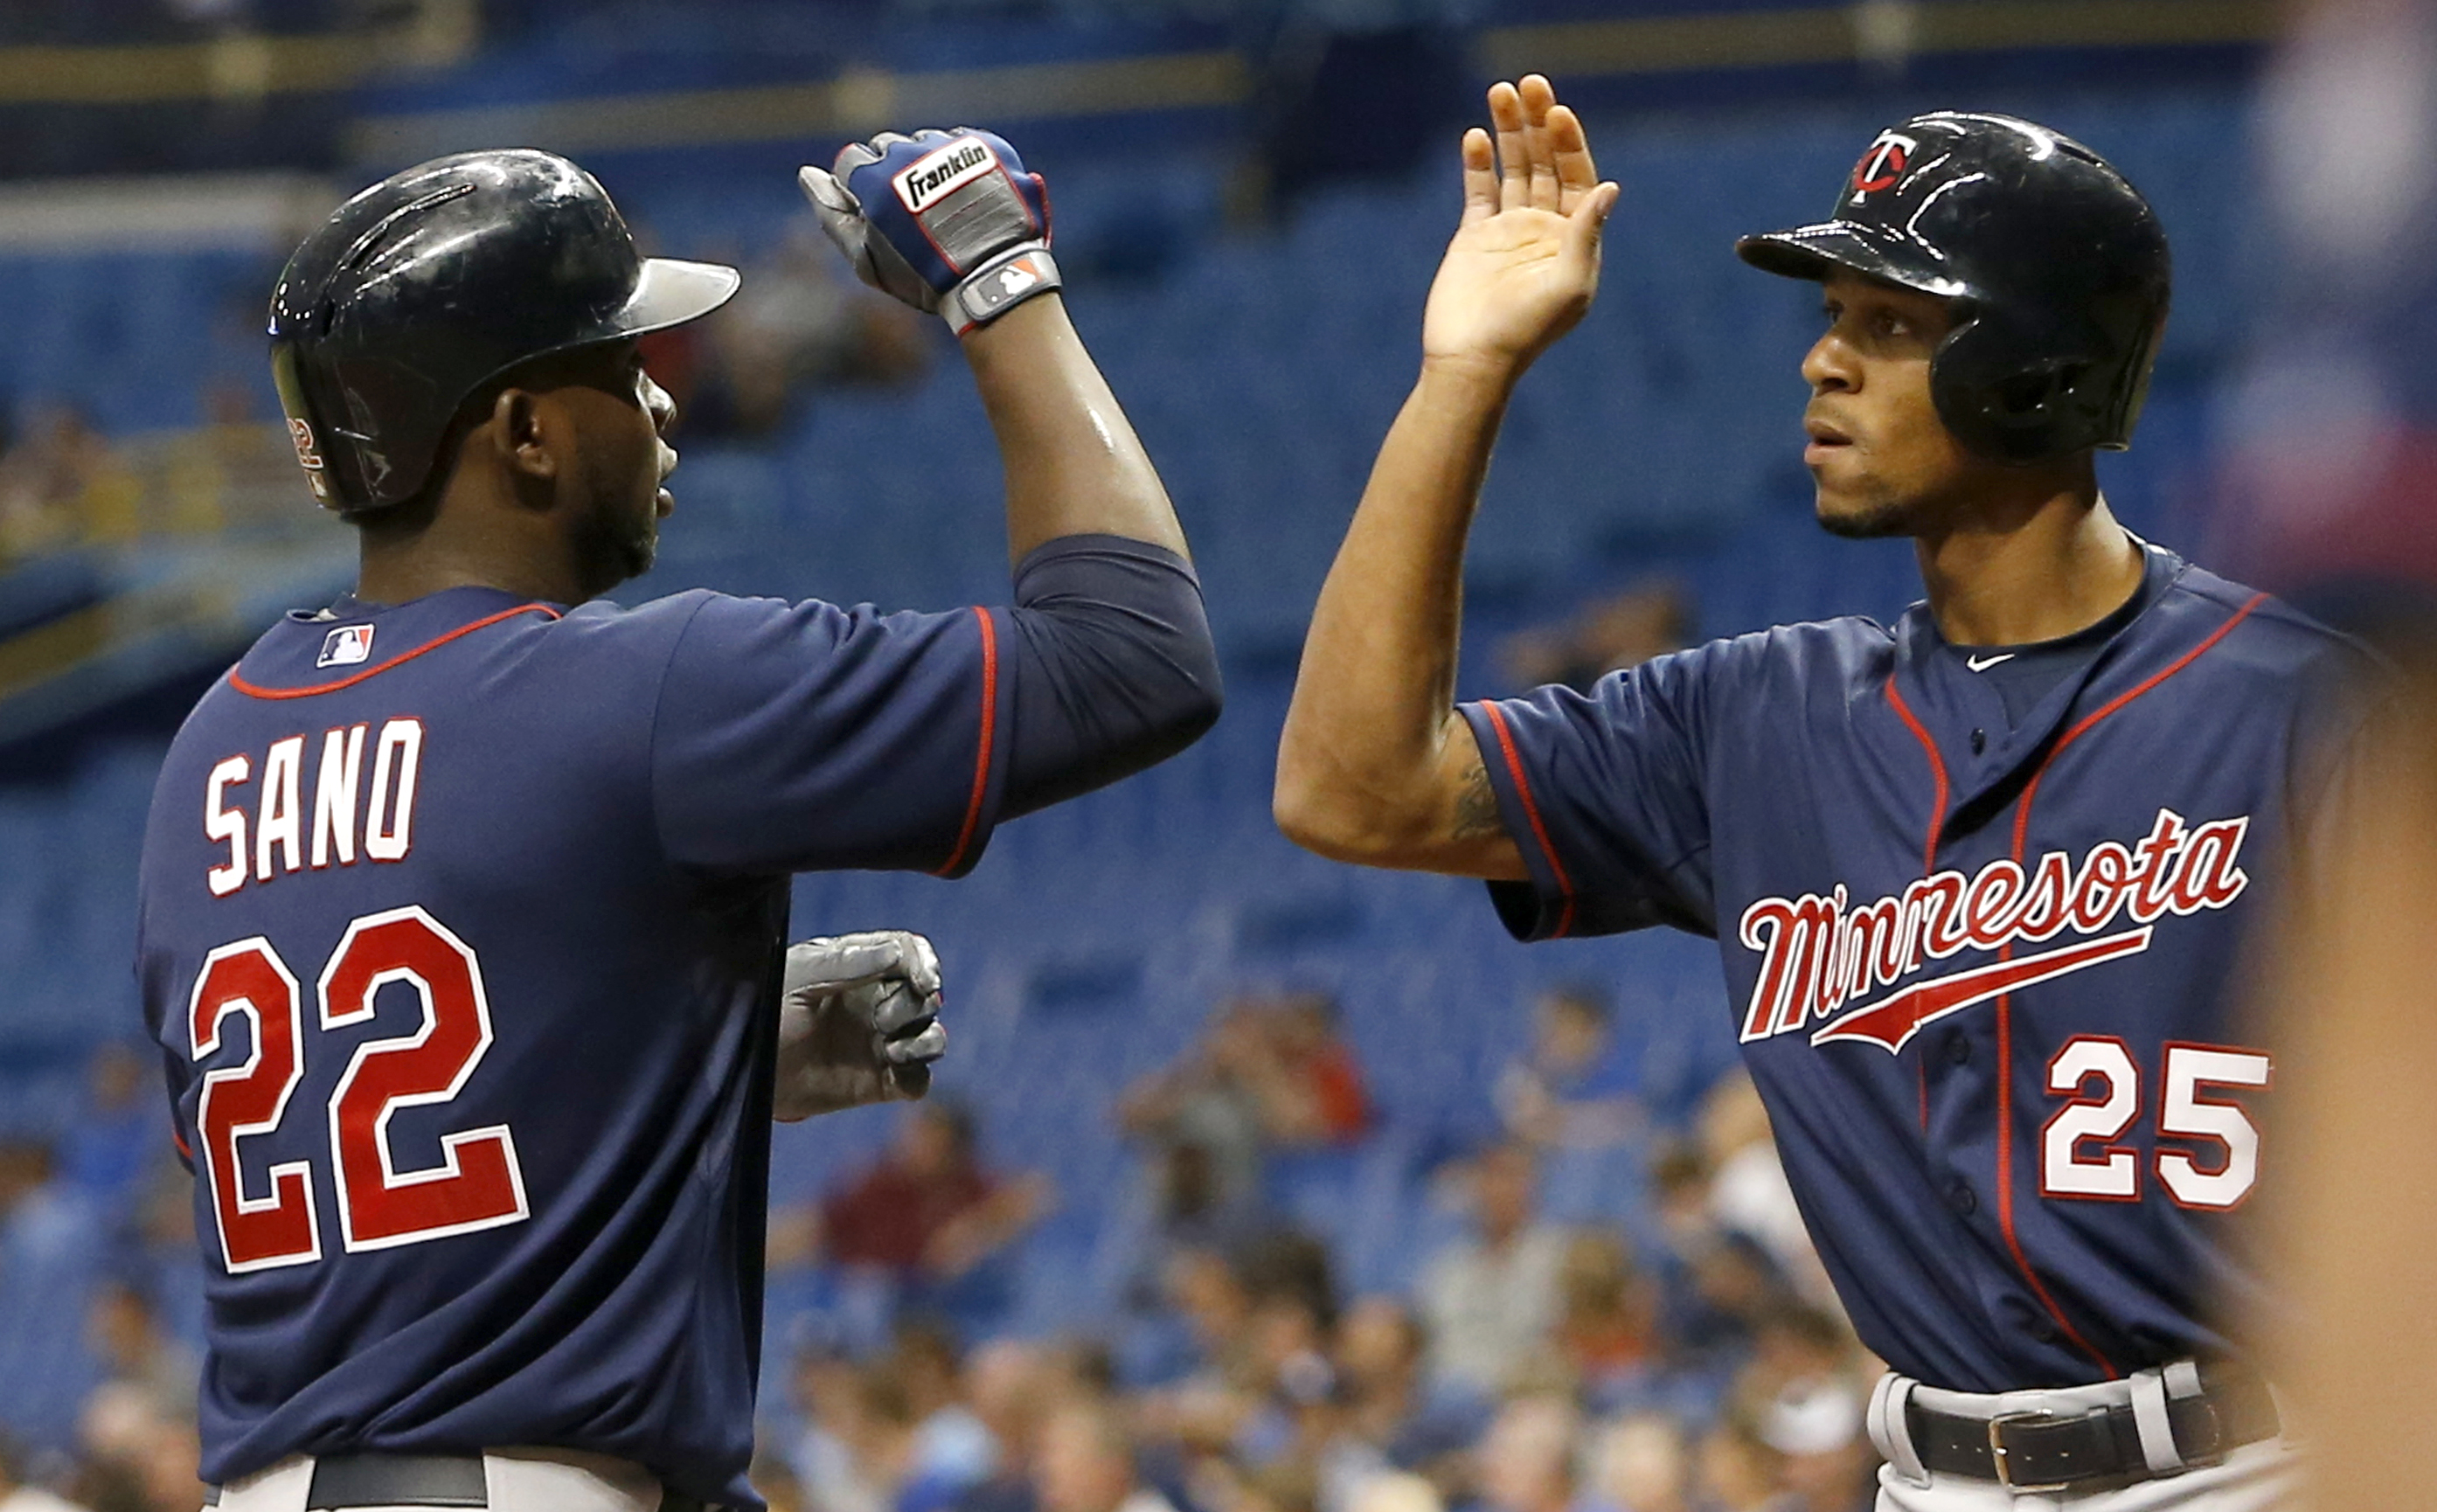 ST. PETERSBURG, FL - AUGUST 25:  Miguel Sano #22 of the Minnesota Twins celebrates at the plate with teammate Byron Buxton #25 following his three-run home run during the first inning of a game against the Tampa Bay Rays on August 25, 2015 at Tropicana Field in St. Petersburg, Florida.  (Photo by Brian Blanco/Getty Images)